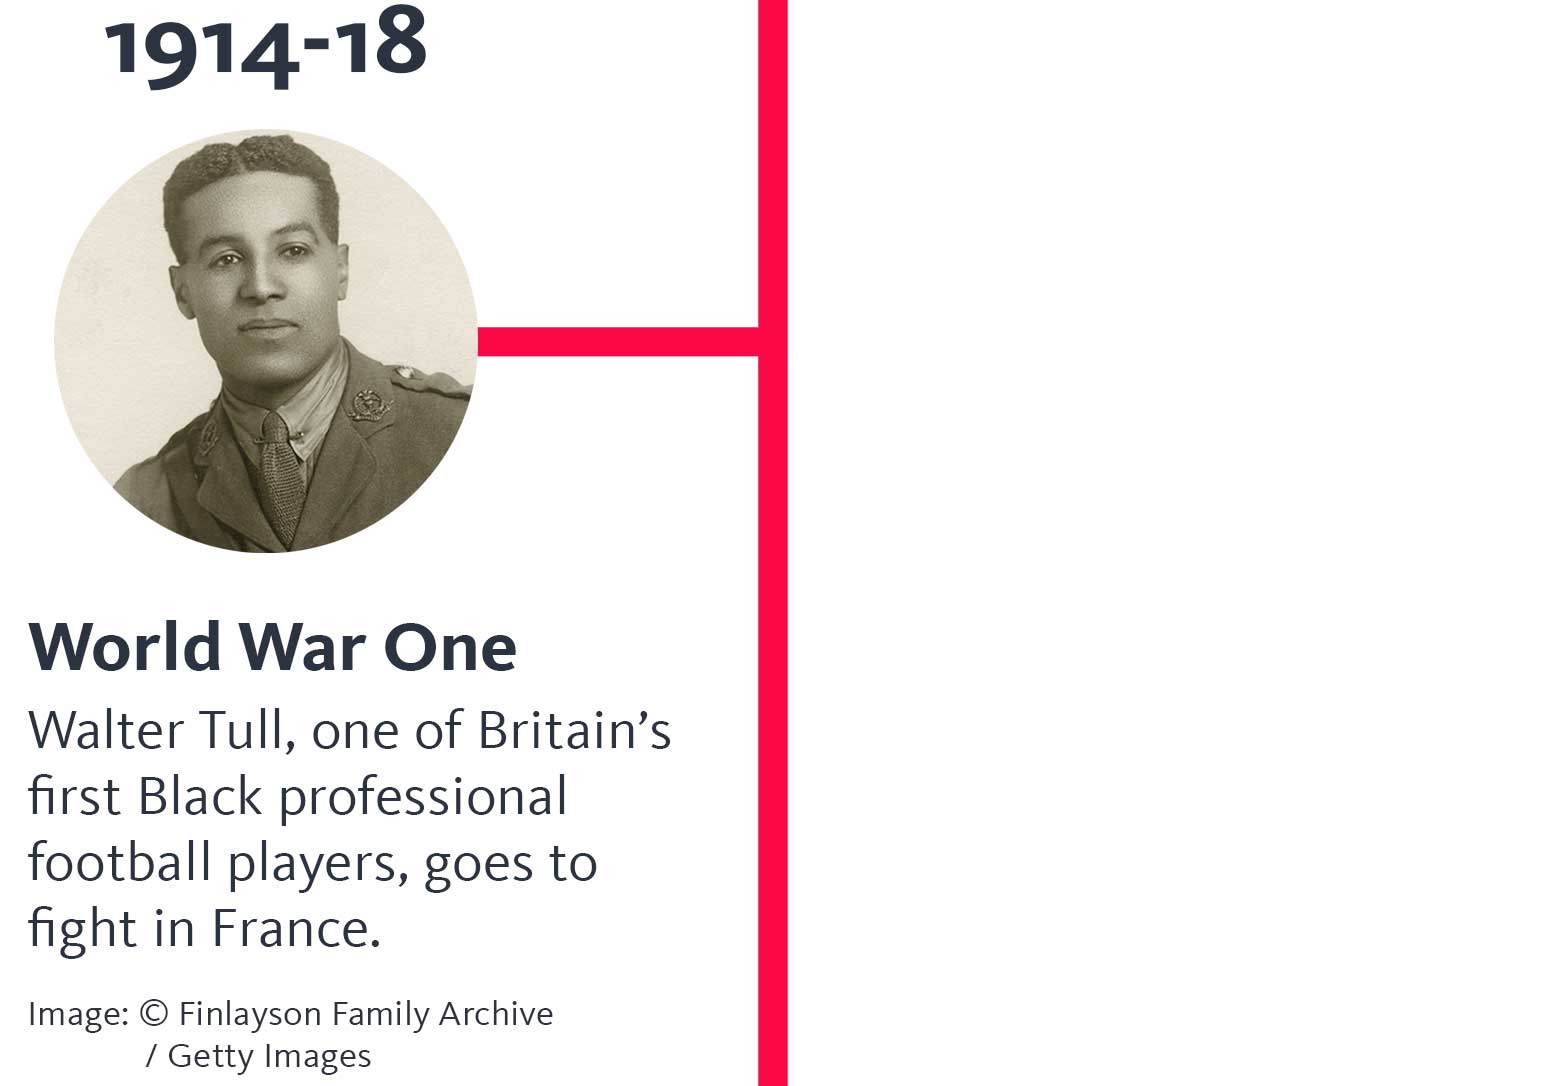 The years '1914-18' appear above a black and white photo of Walter Tull in military uniform. A heading below says 'World War One', and text below that says 'Walter Tull, one of Britain's first Black professional football players, goes to fight in France.' and below that, 'Image © Finlayson Family Archive / Getty Images', and a button says 'Discover his story'.